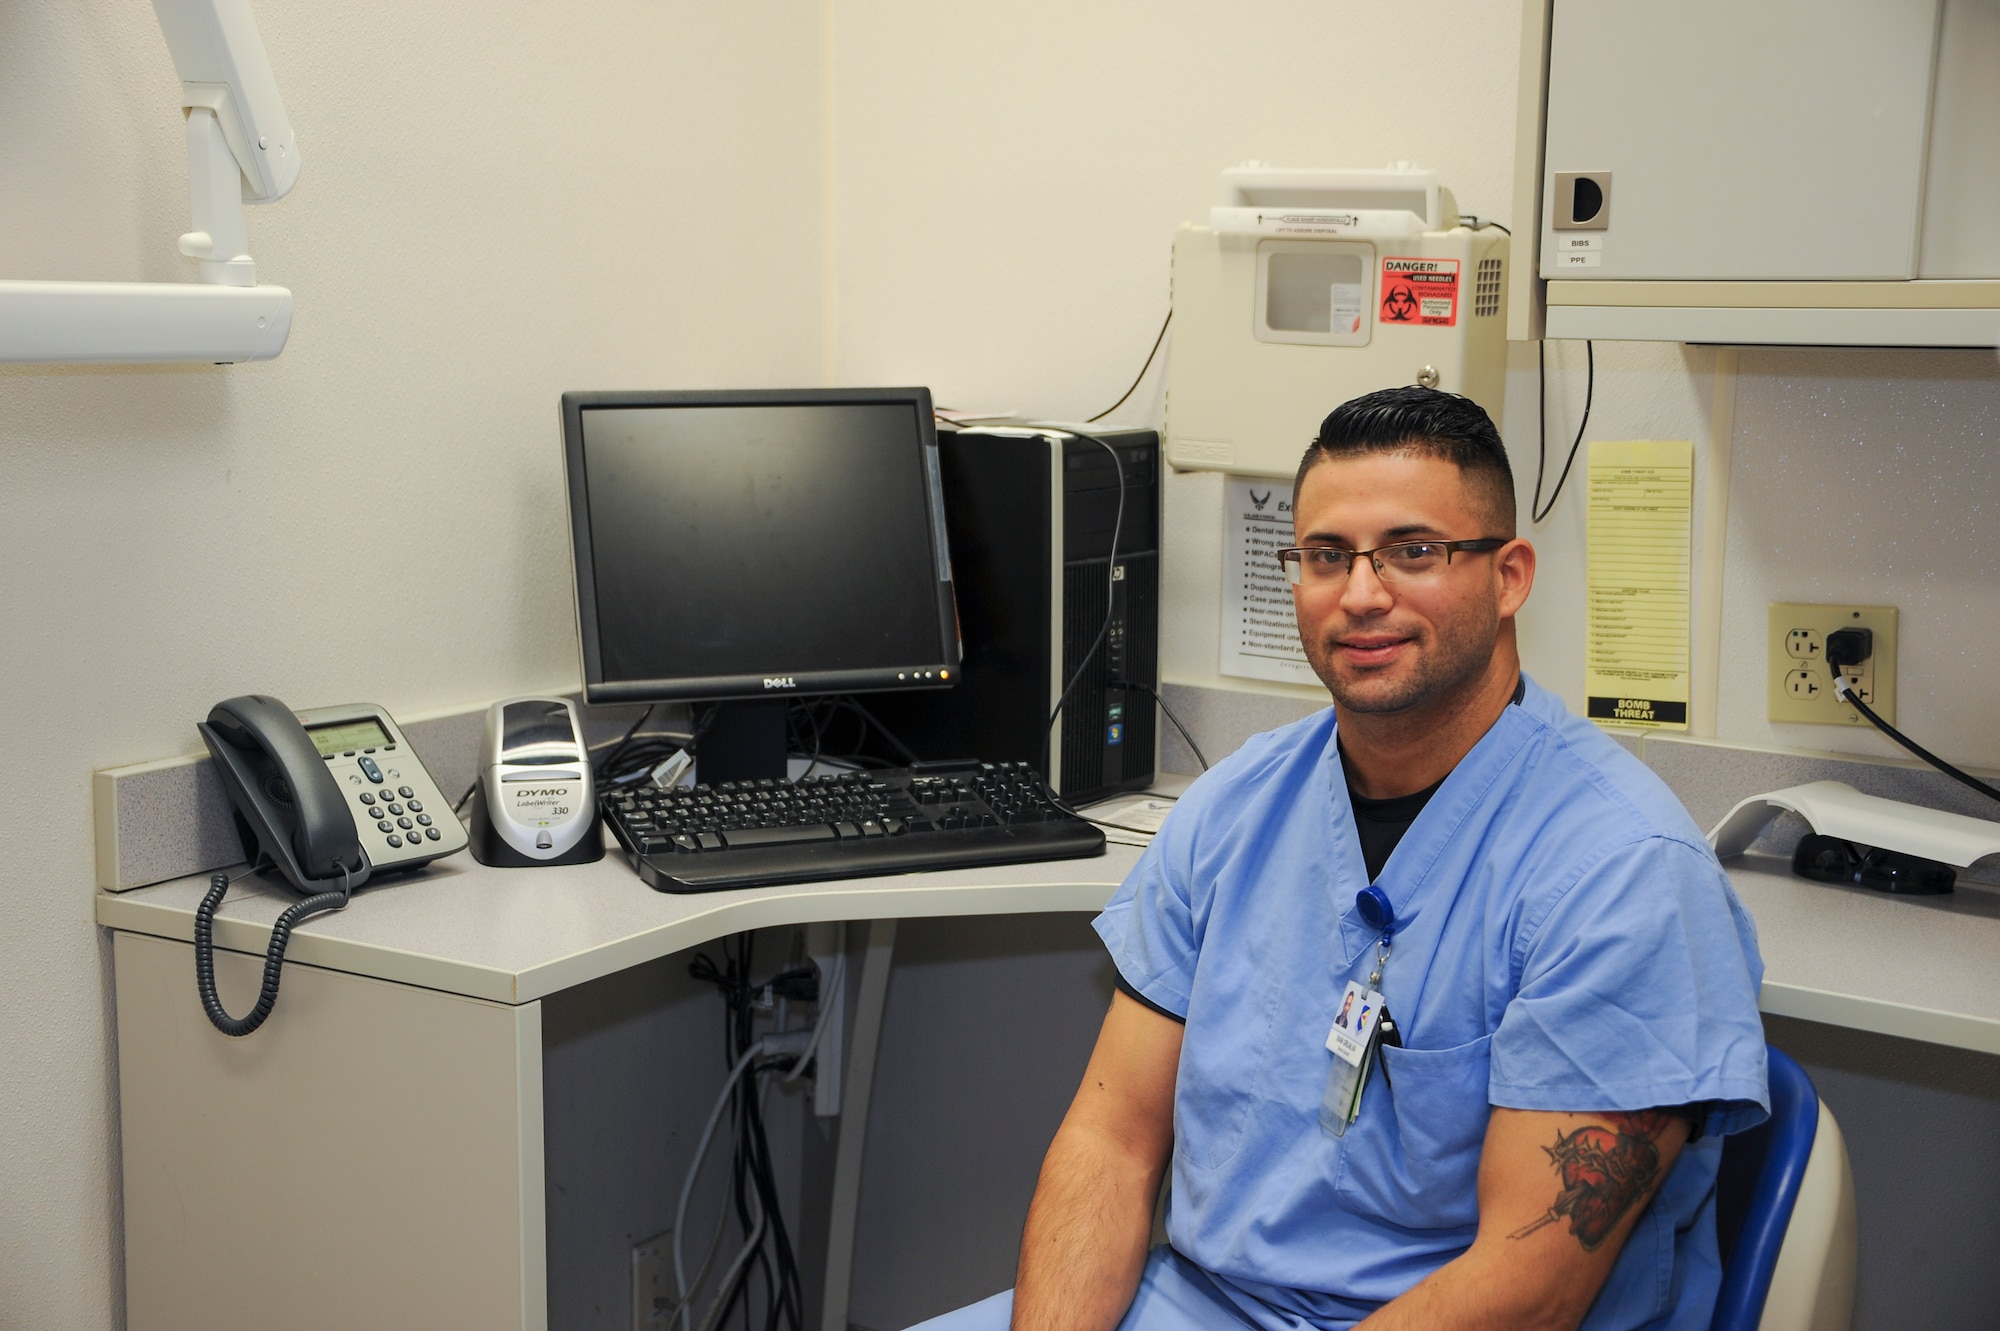 Ivan Grijalva, 355th Dental Squadron dental assistant, sits at a desk in the dental clinic at Davis-Monthan Air Force Base, Feb. 11, 2016. Grijalva used his knowledge from how he constricts blood flow with bands when starting IVs at work to apply a tourniquet to stop the bleeding of a motorcycle accident victim. (U.S. Air Force photo by Airman 1st Class Ashley N. Steffen/ Released)